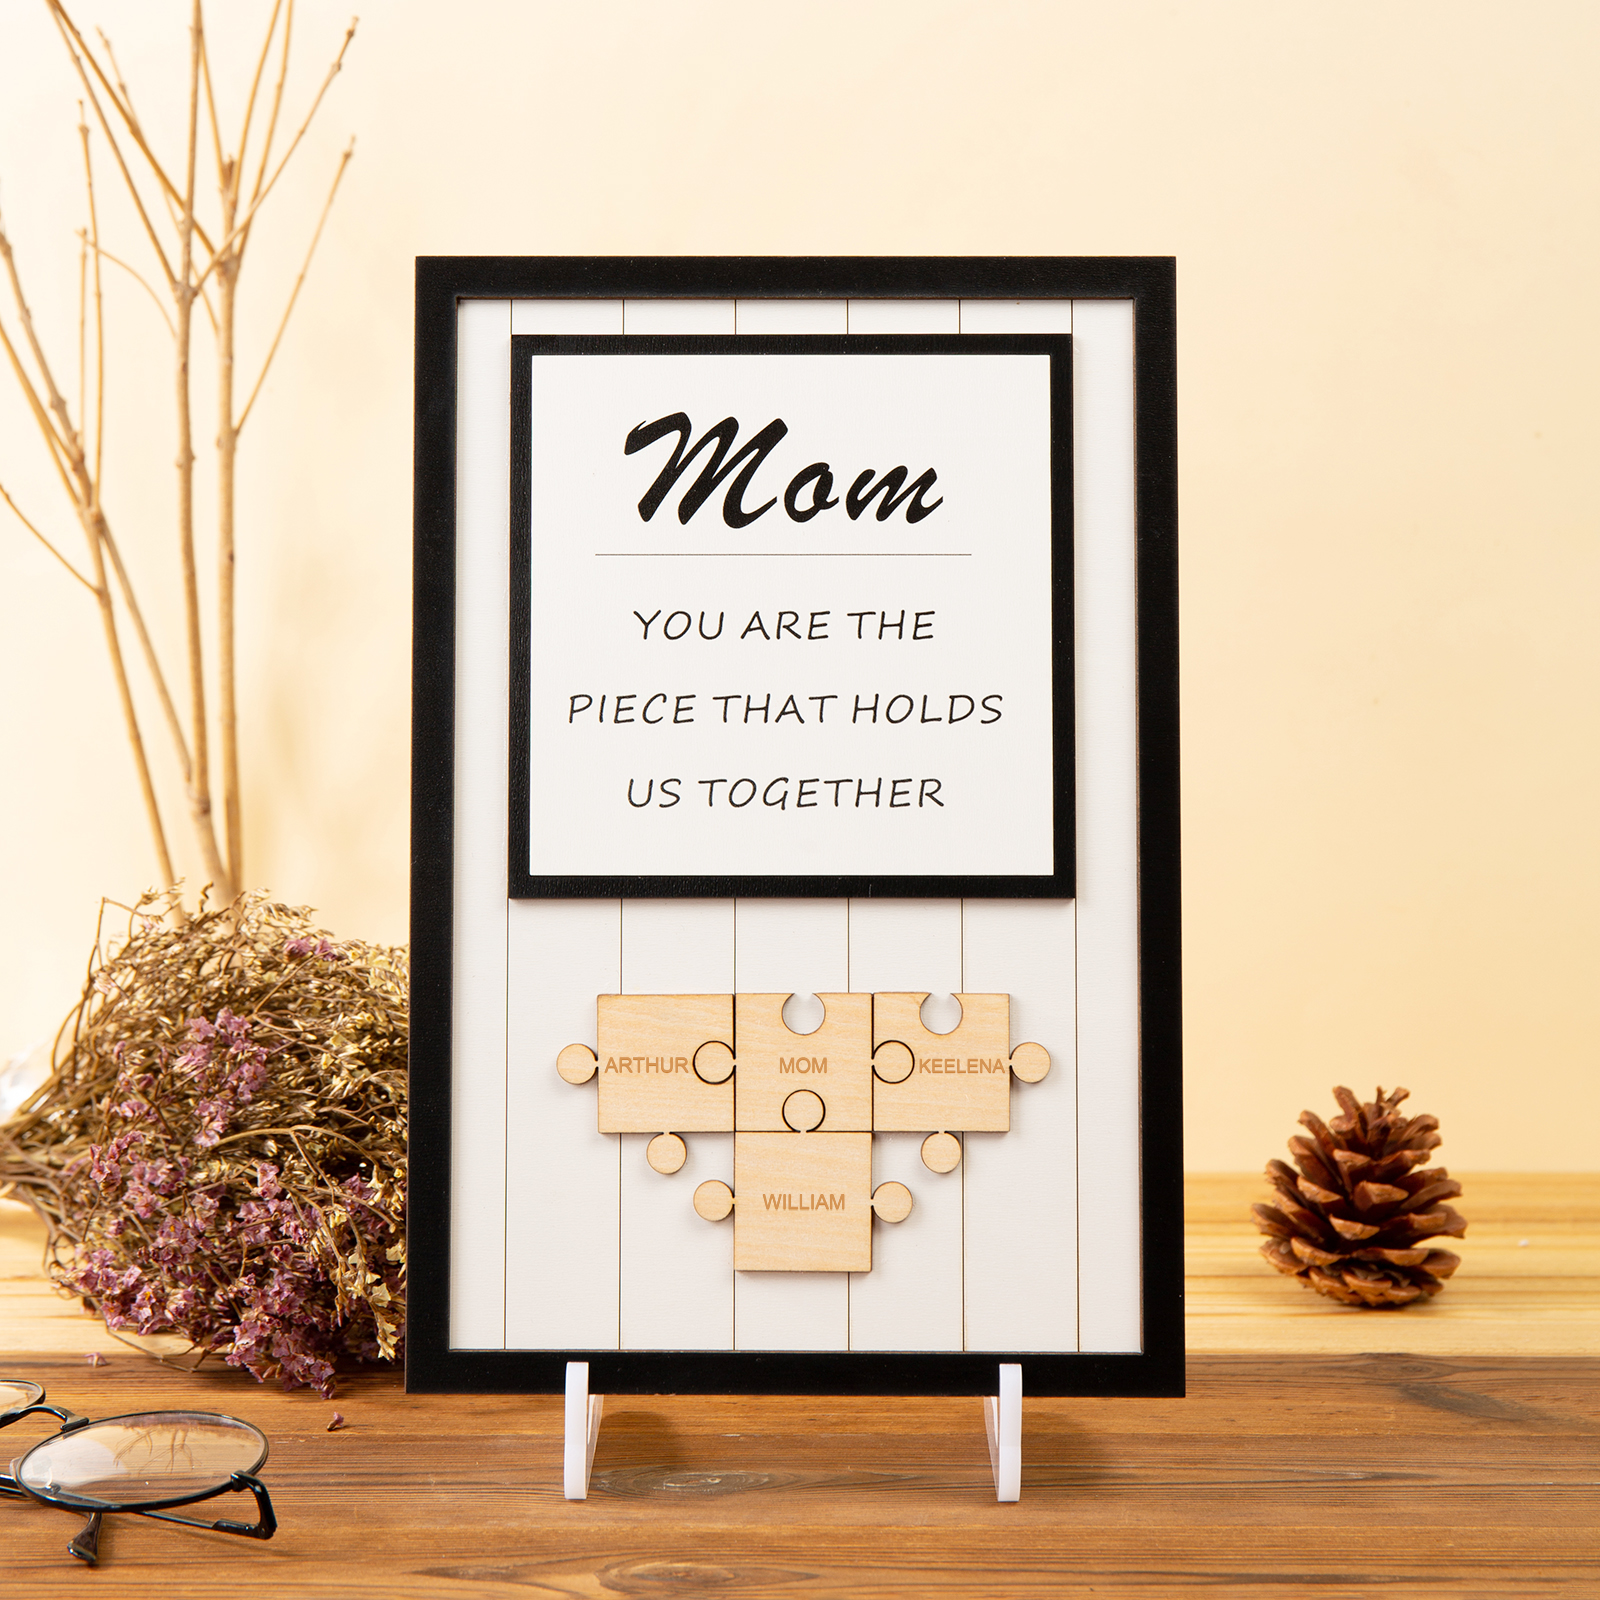 Mom Puzzle Sign Personalized 7 Names Wooden Sign Family Gifts-Mom You Are the Piece that Holds Us Together